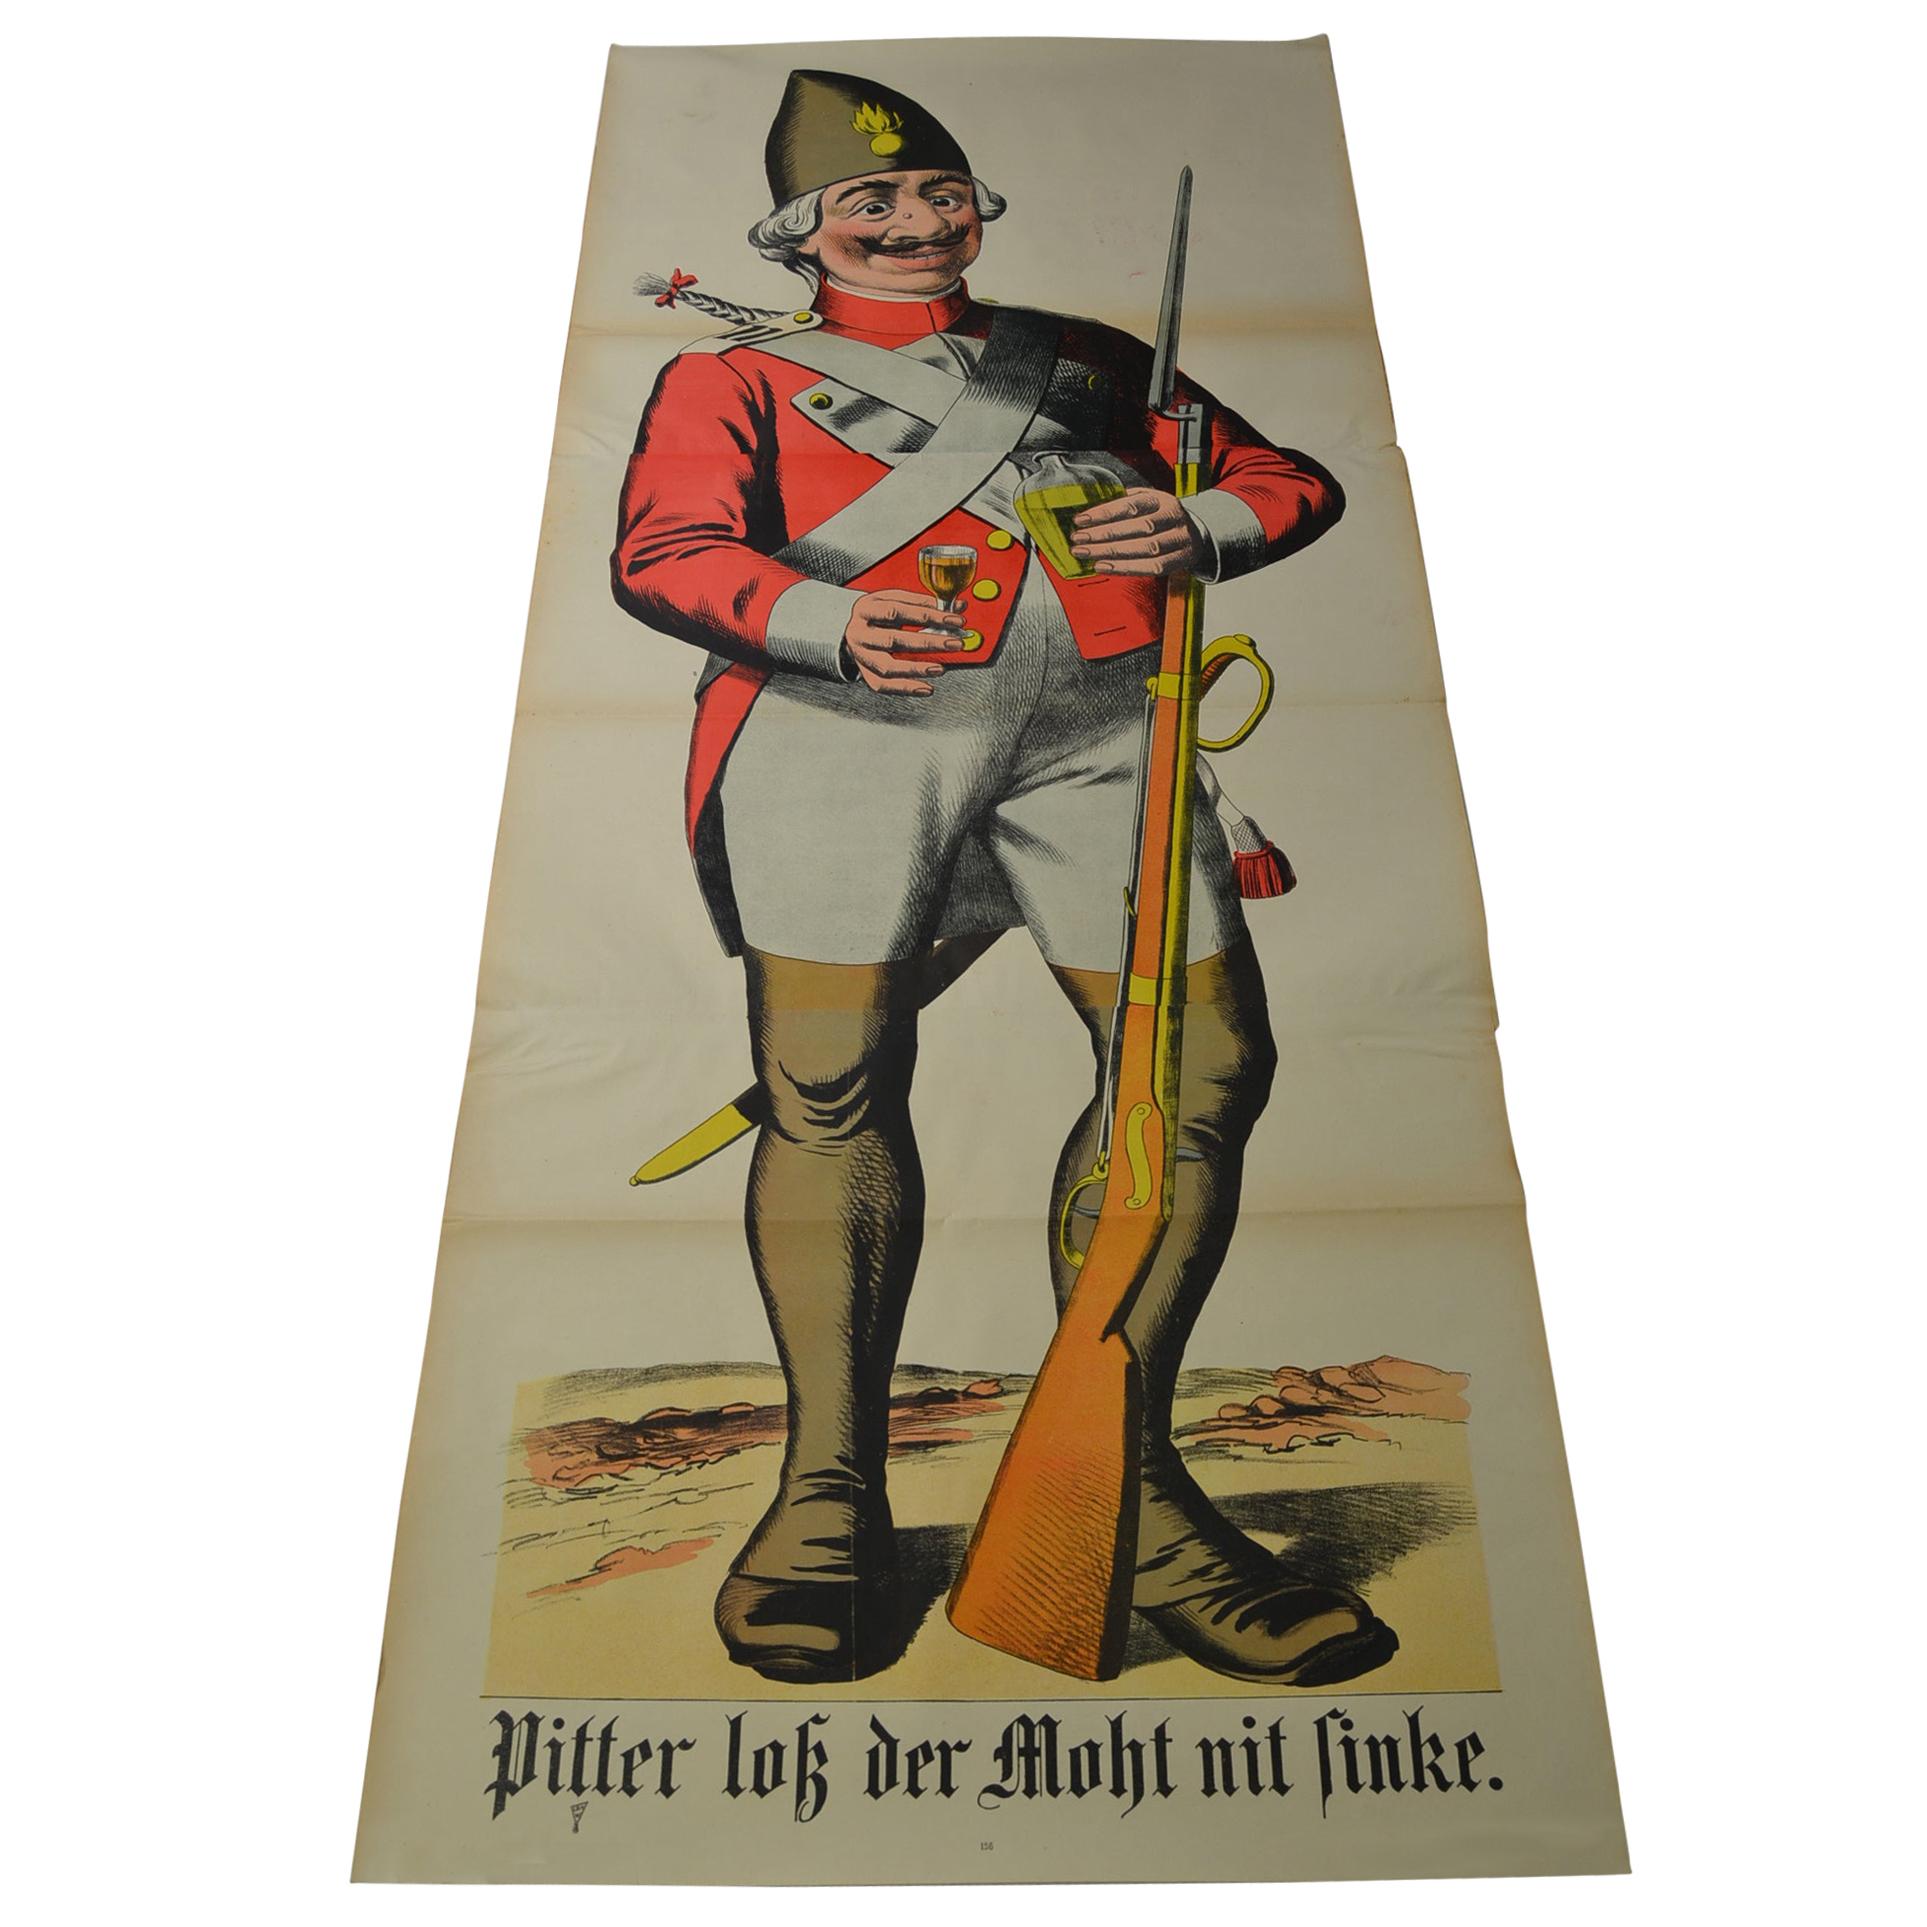 1880s European Lifesize Stone Lithography Poster with an Officer